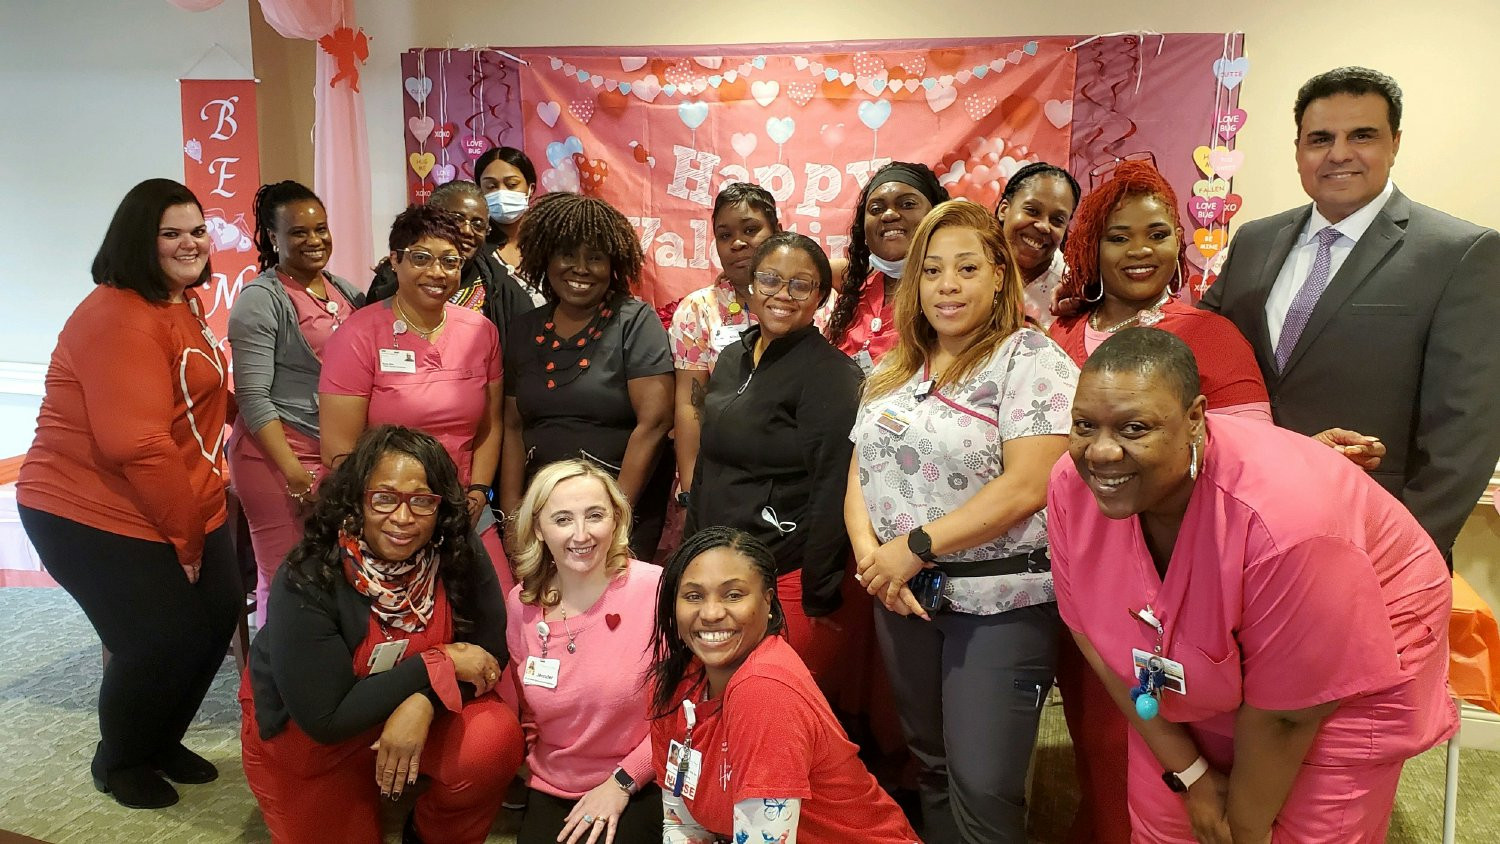 The nursing team takes a break from their Valentine's Day pot luck party for a picture.